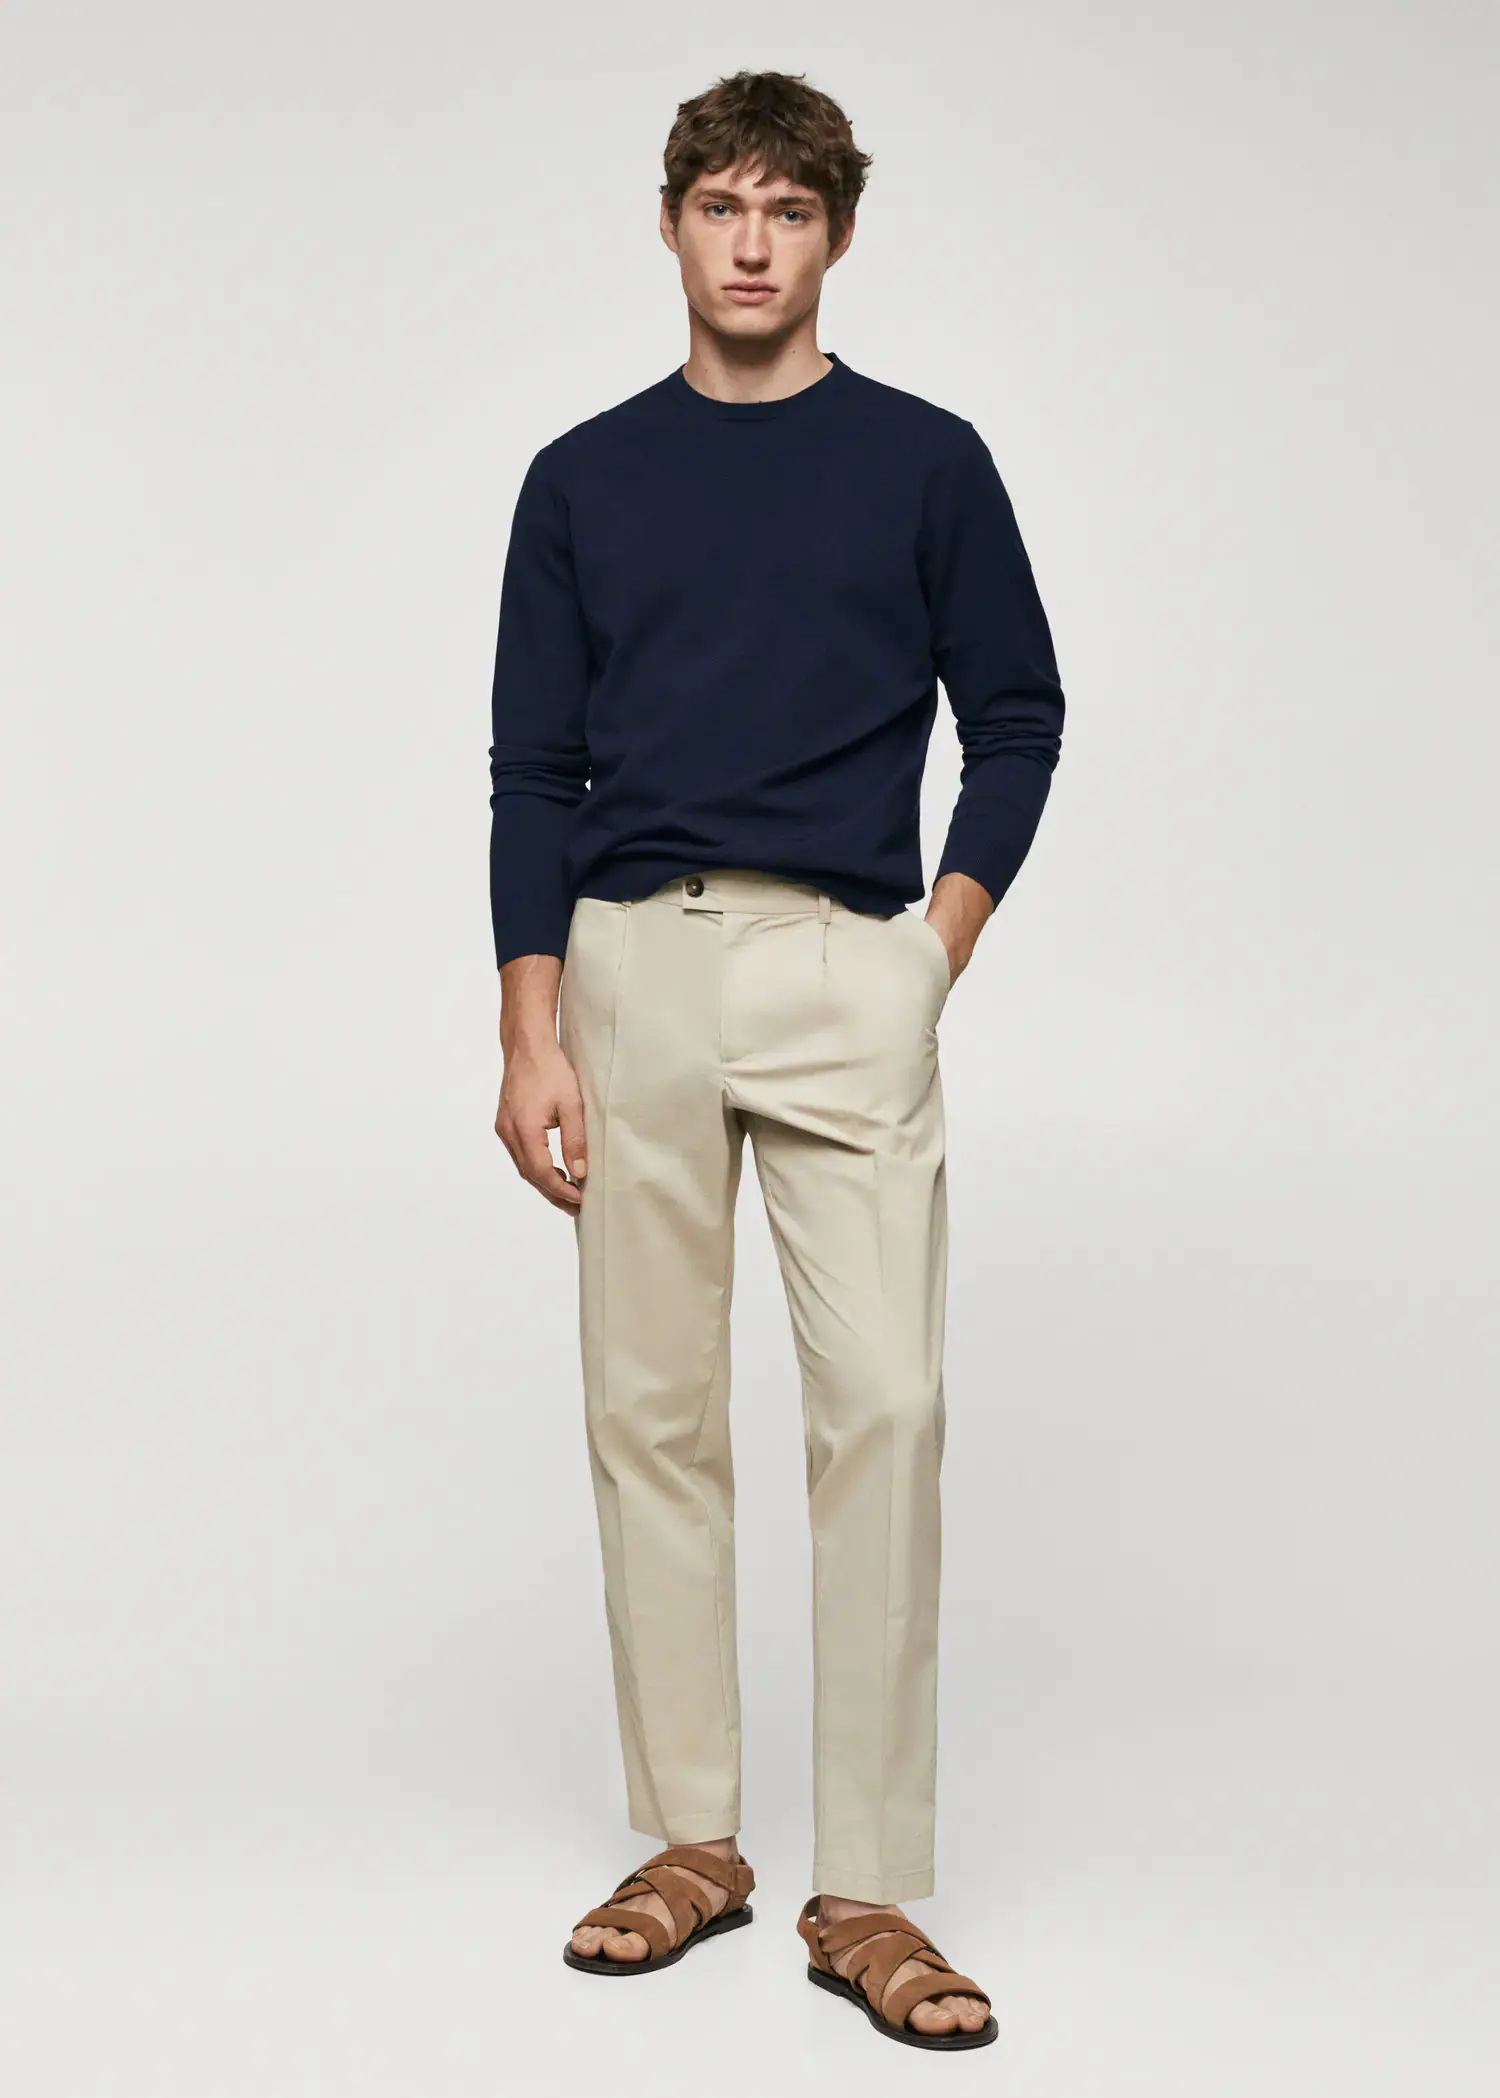 Mango Fine-knit sweater. a man in a navy blue sweater and beige pants. 